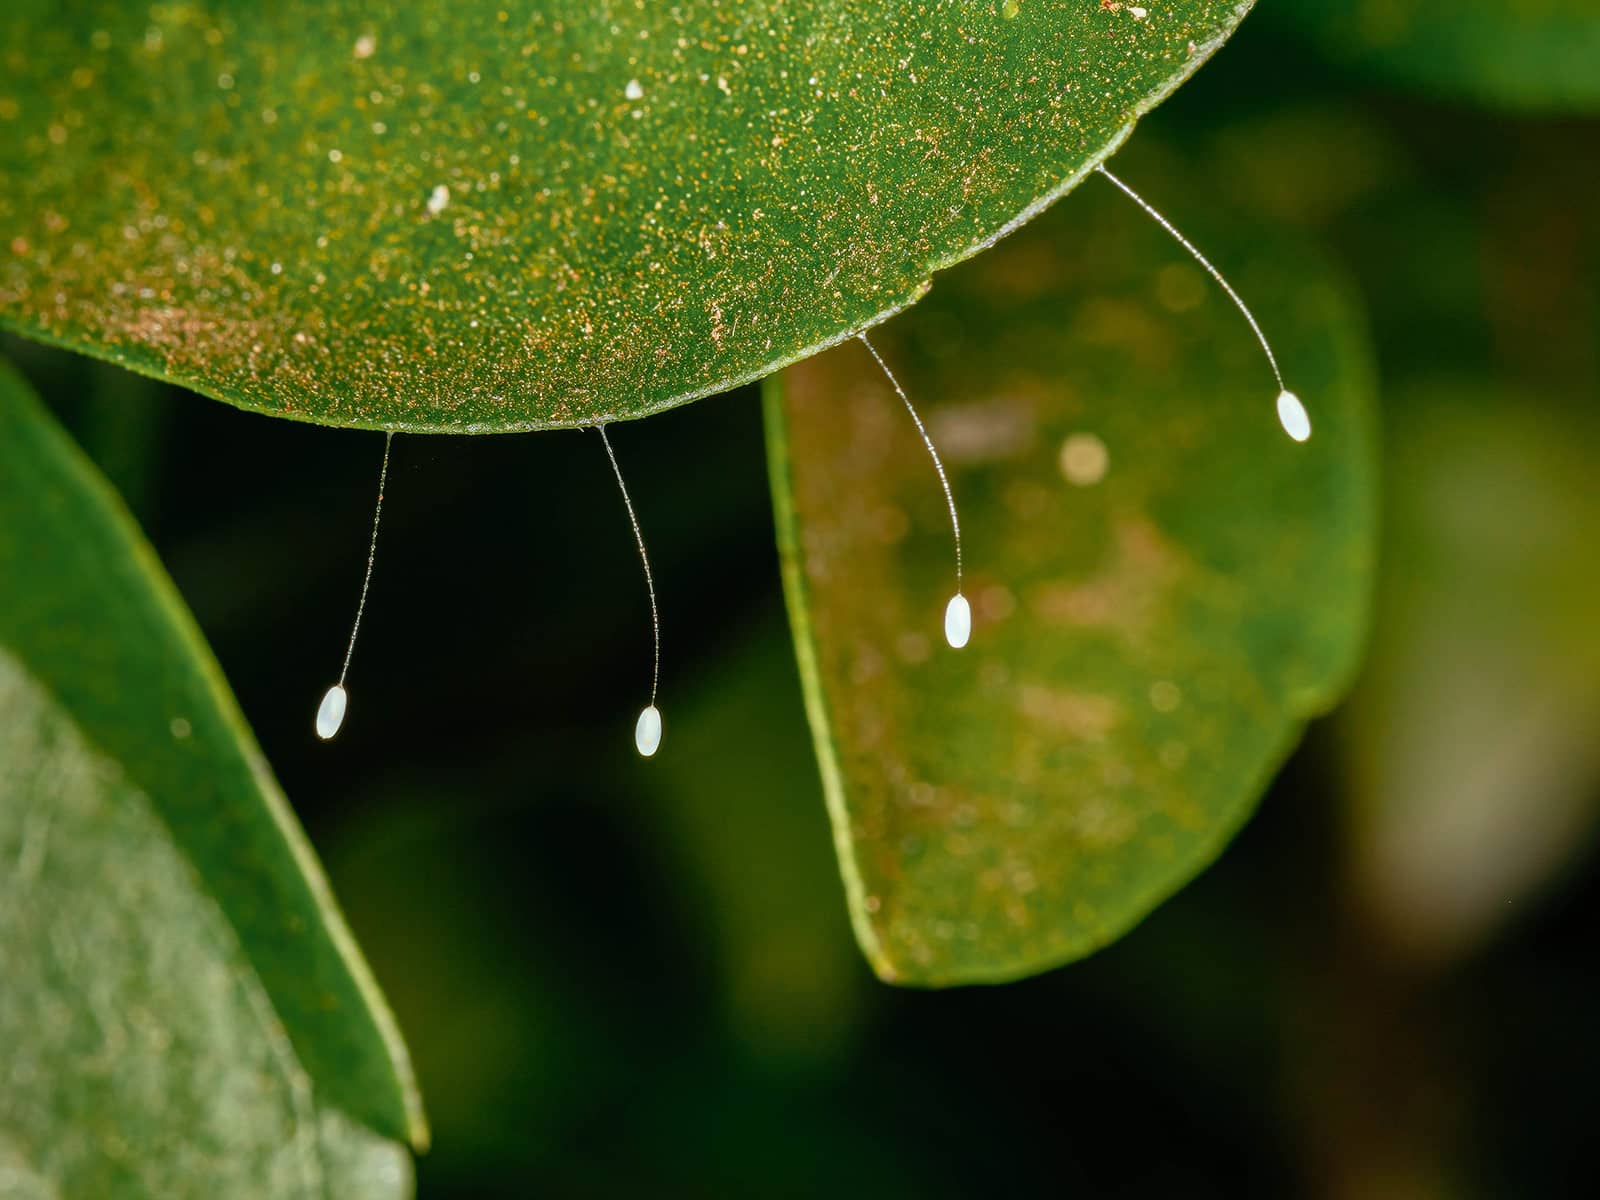 Four delicate lacewing eggs suspended from filaments on the edge of a leaf